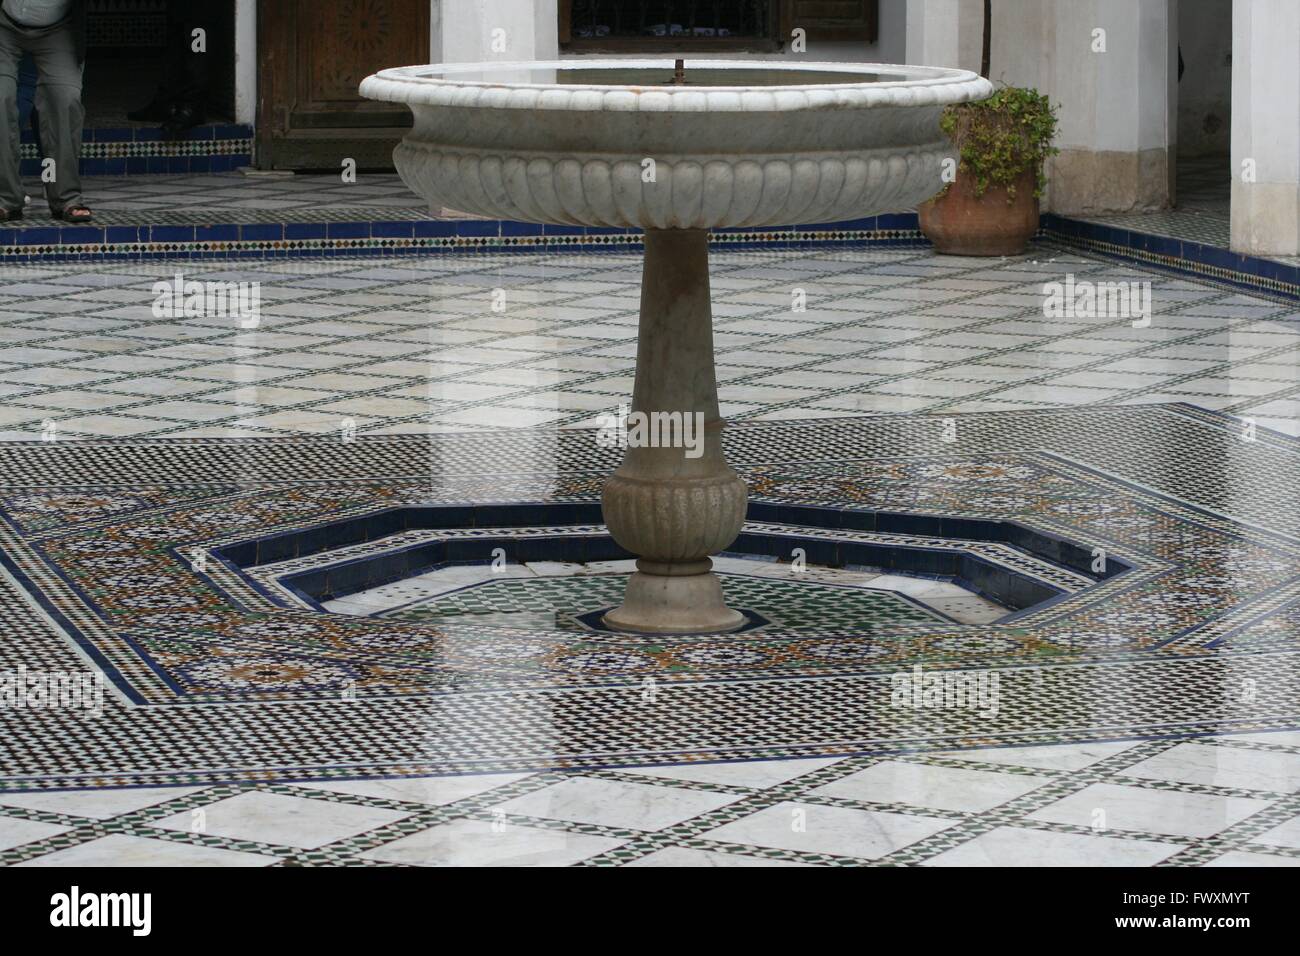 Mosaic floor and fountain in a Moroccan palace Stock Photo